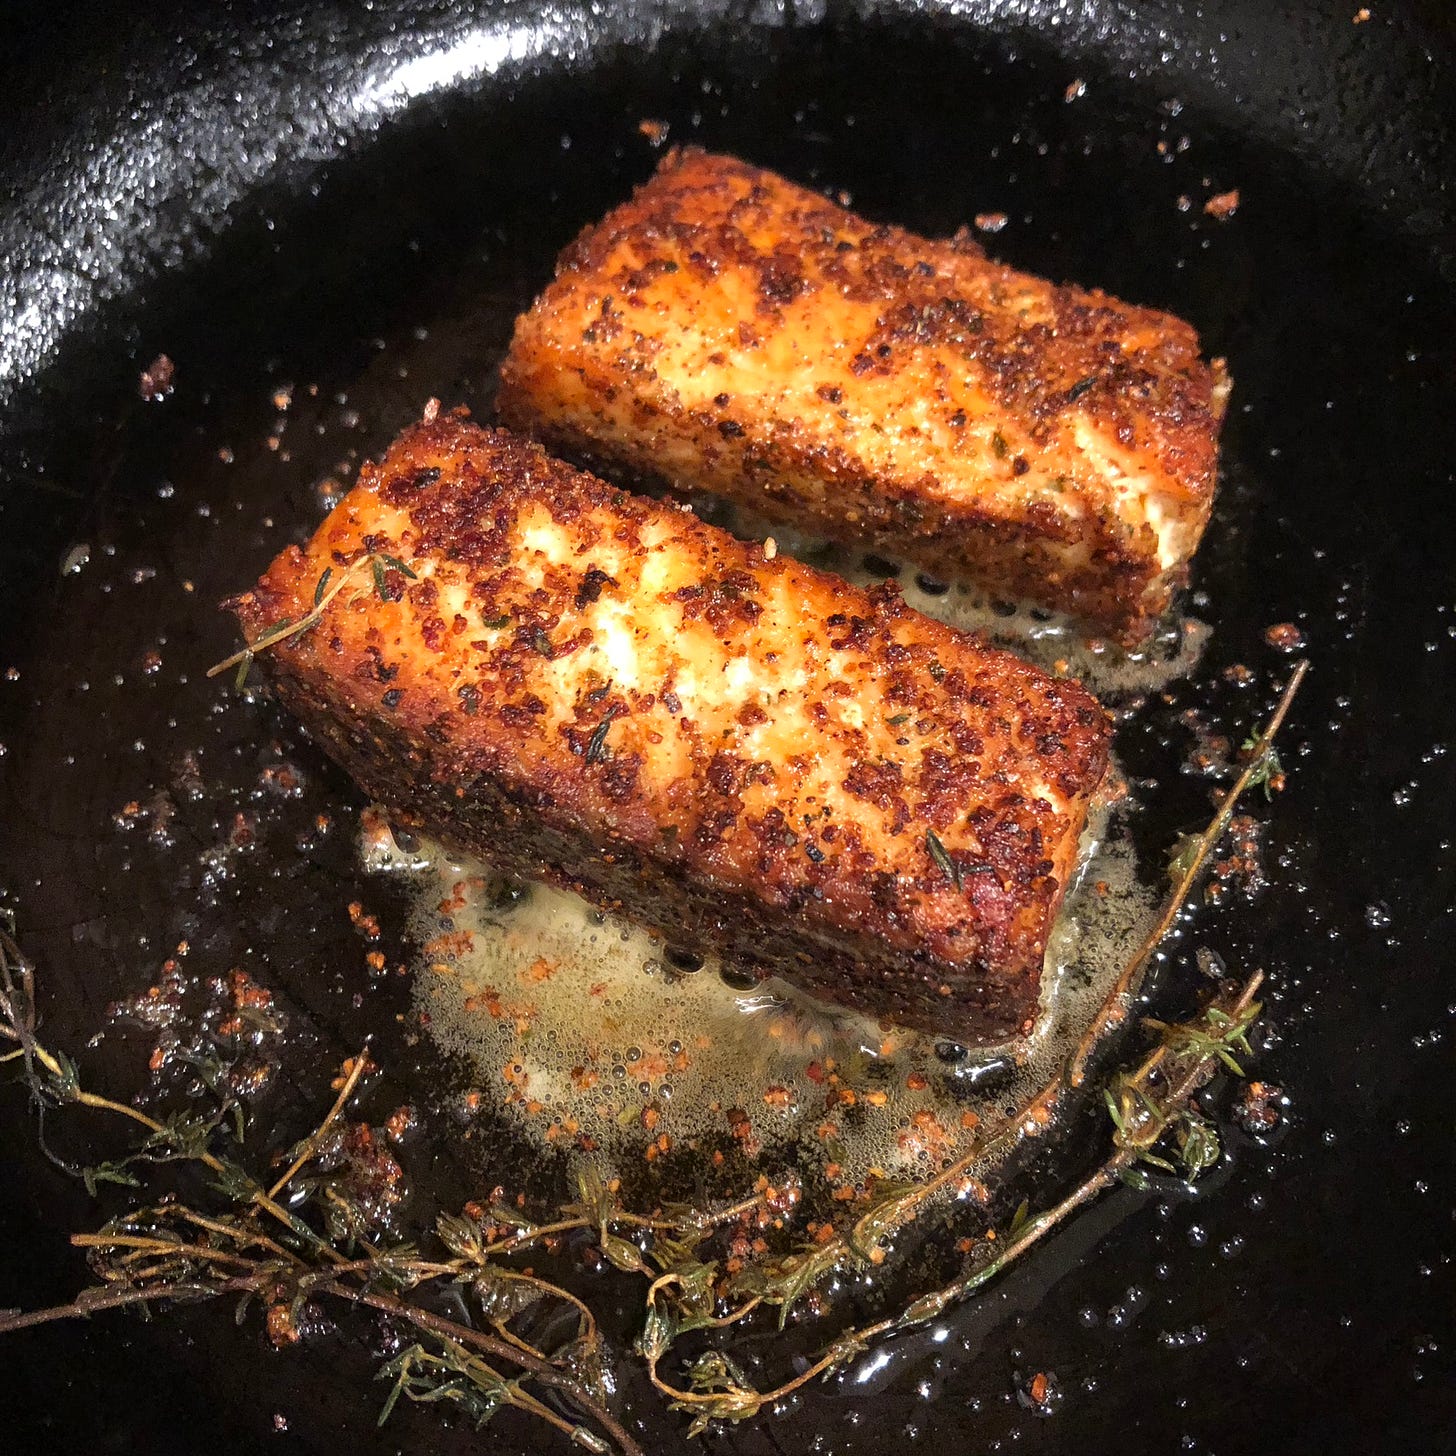 salmon recipe. About That Life, newsletter about food.